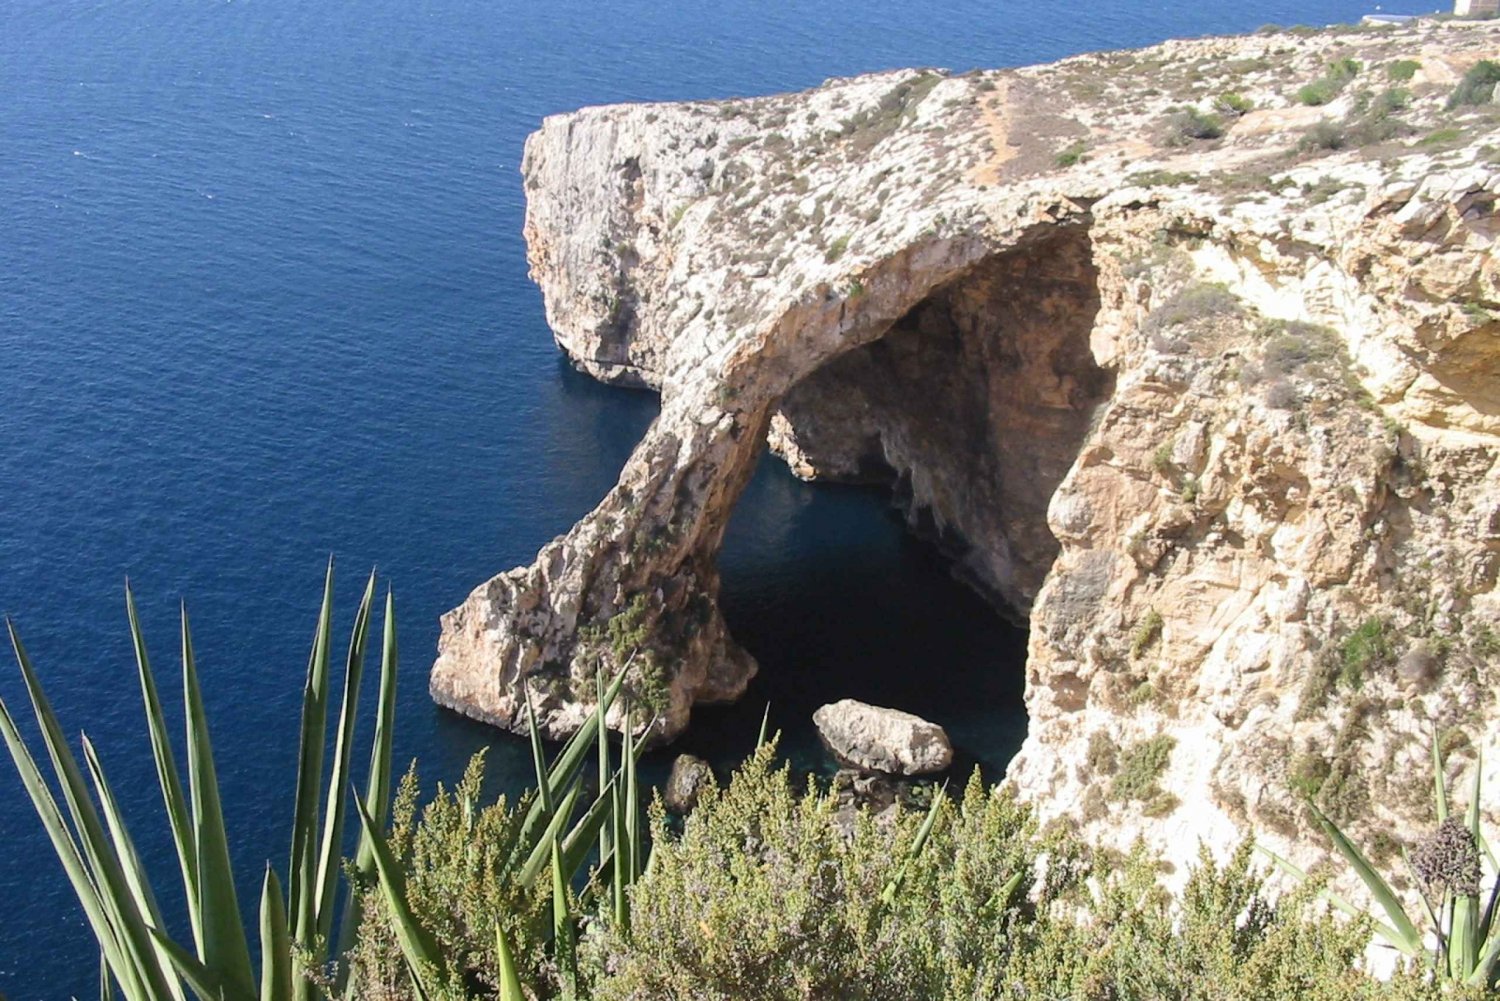 Snorkeling-and-Diving-in-the-Blue-Grotto